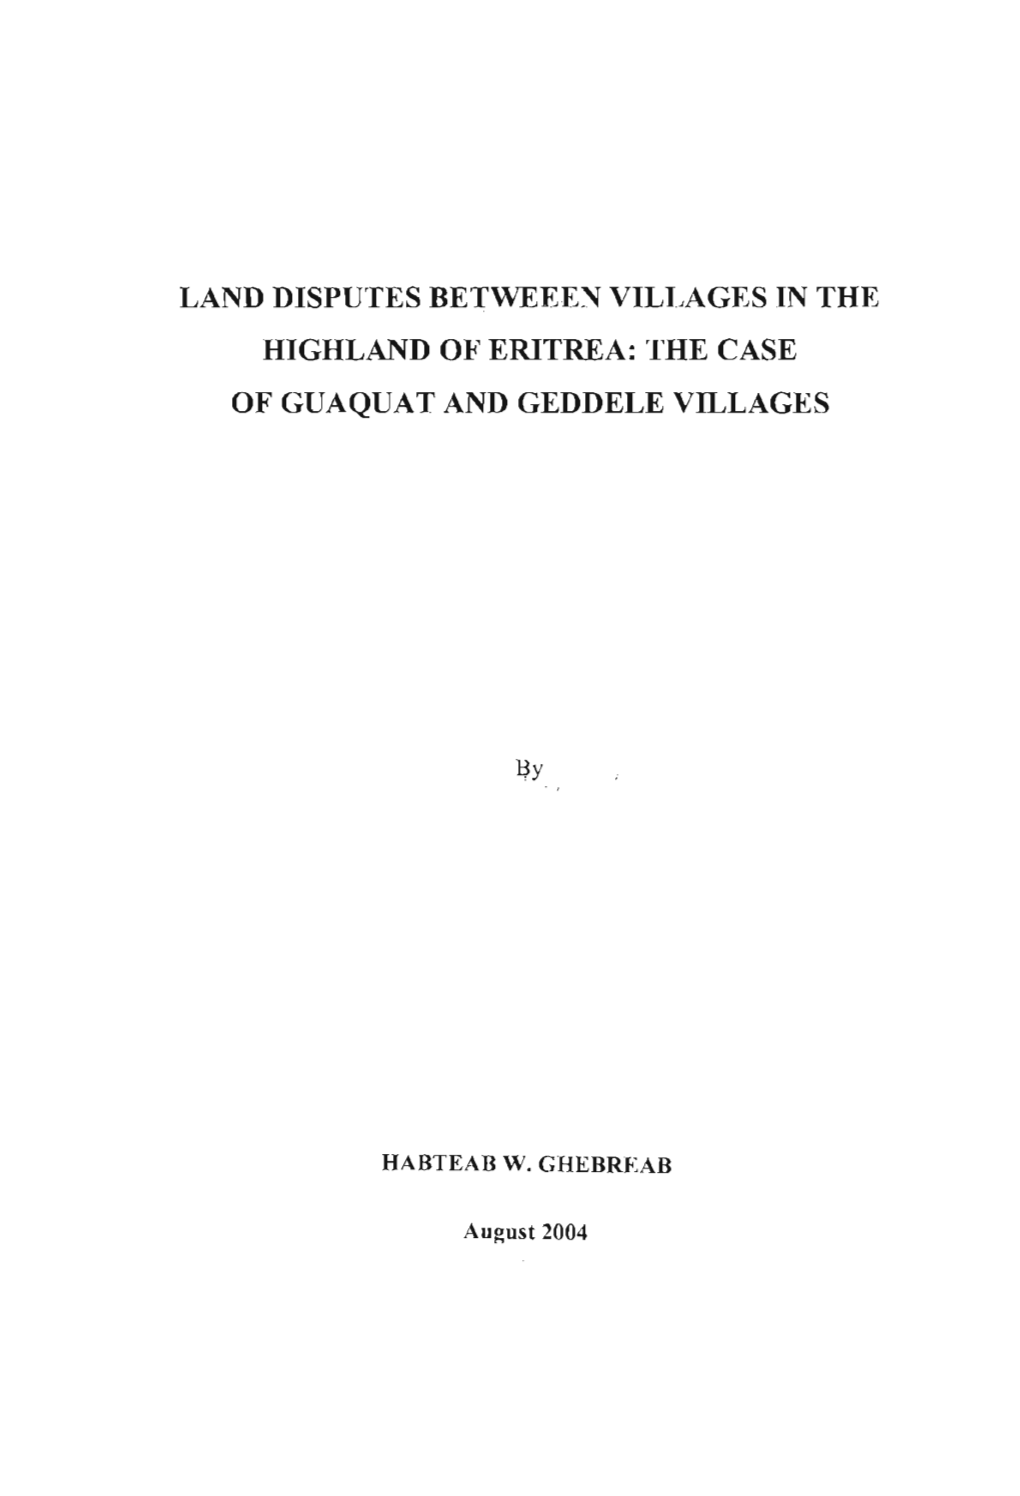 LAND DISPUTES Berweeen VILLAGES in the HIGHLAND of ERITREA: the CASE of GUAQUAT and GEDDELE VILLAGES